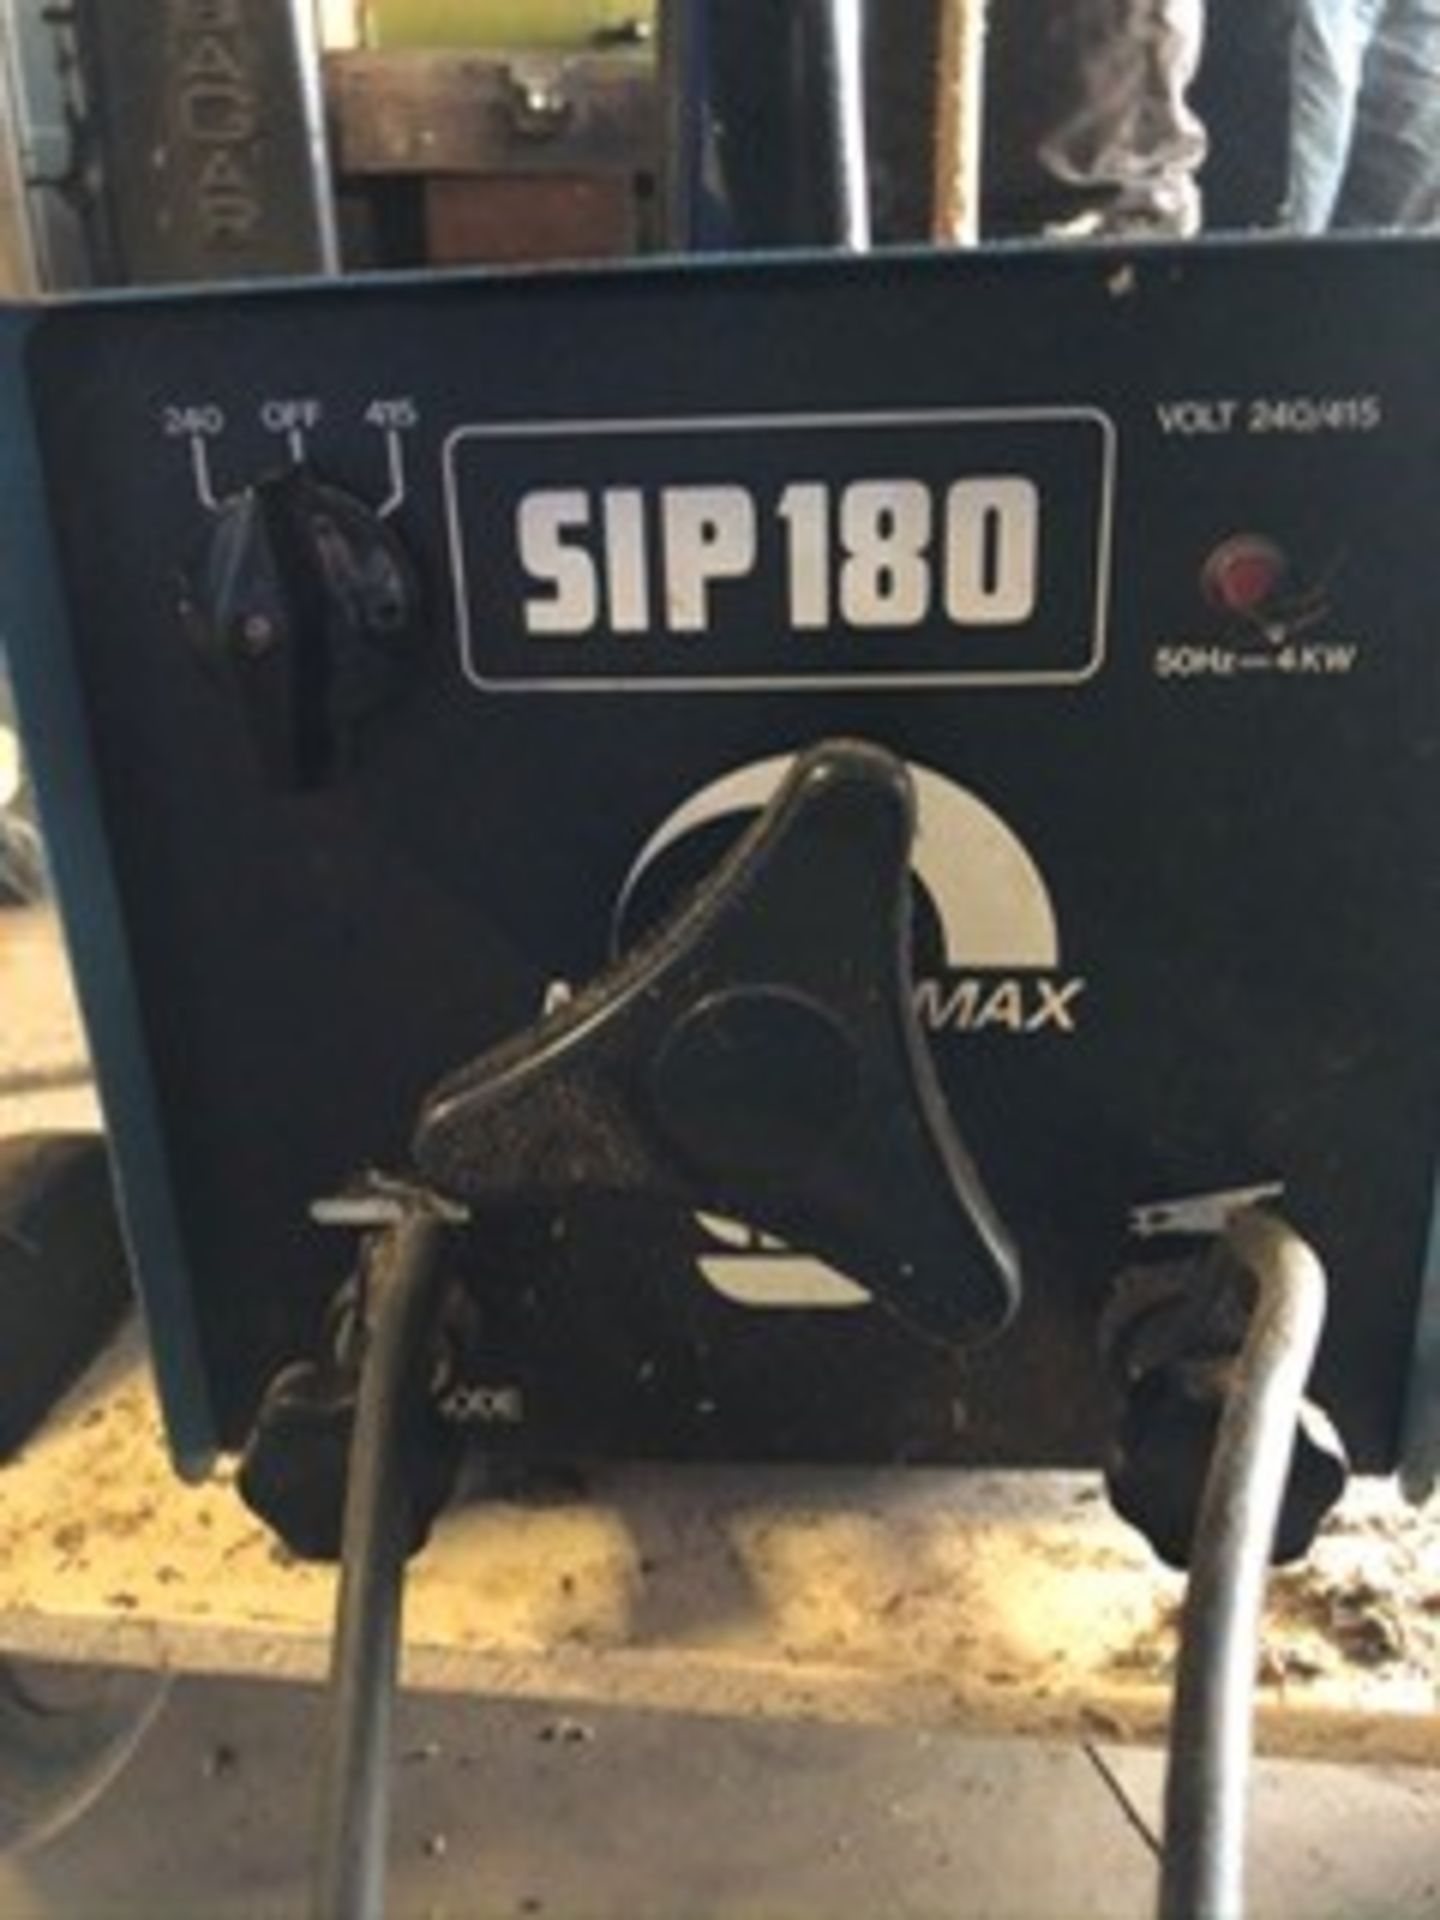 SIP 180 welder. Electrical safety test passed (11.09.20).